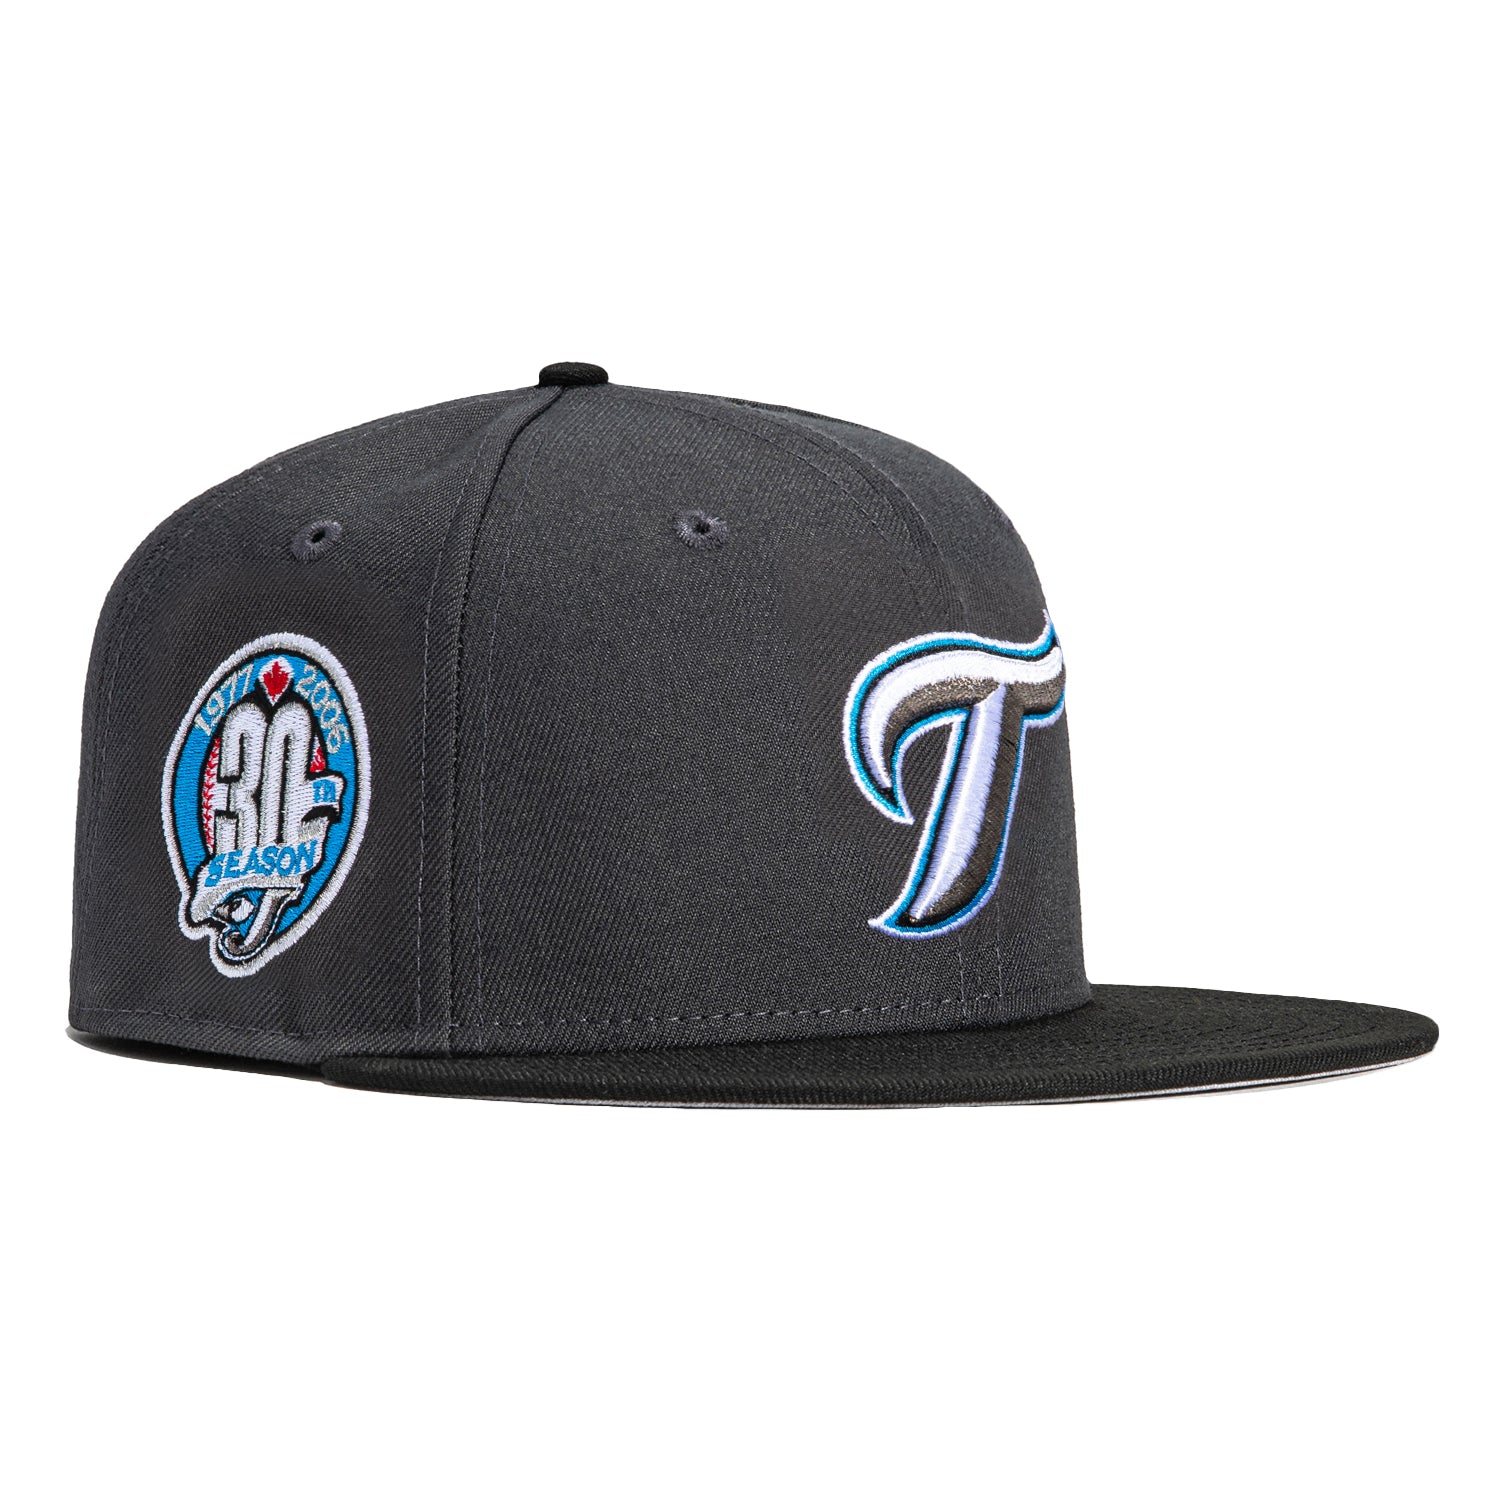 Exclusive to Jays Shop! Available - Toronto Blue Jays